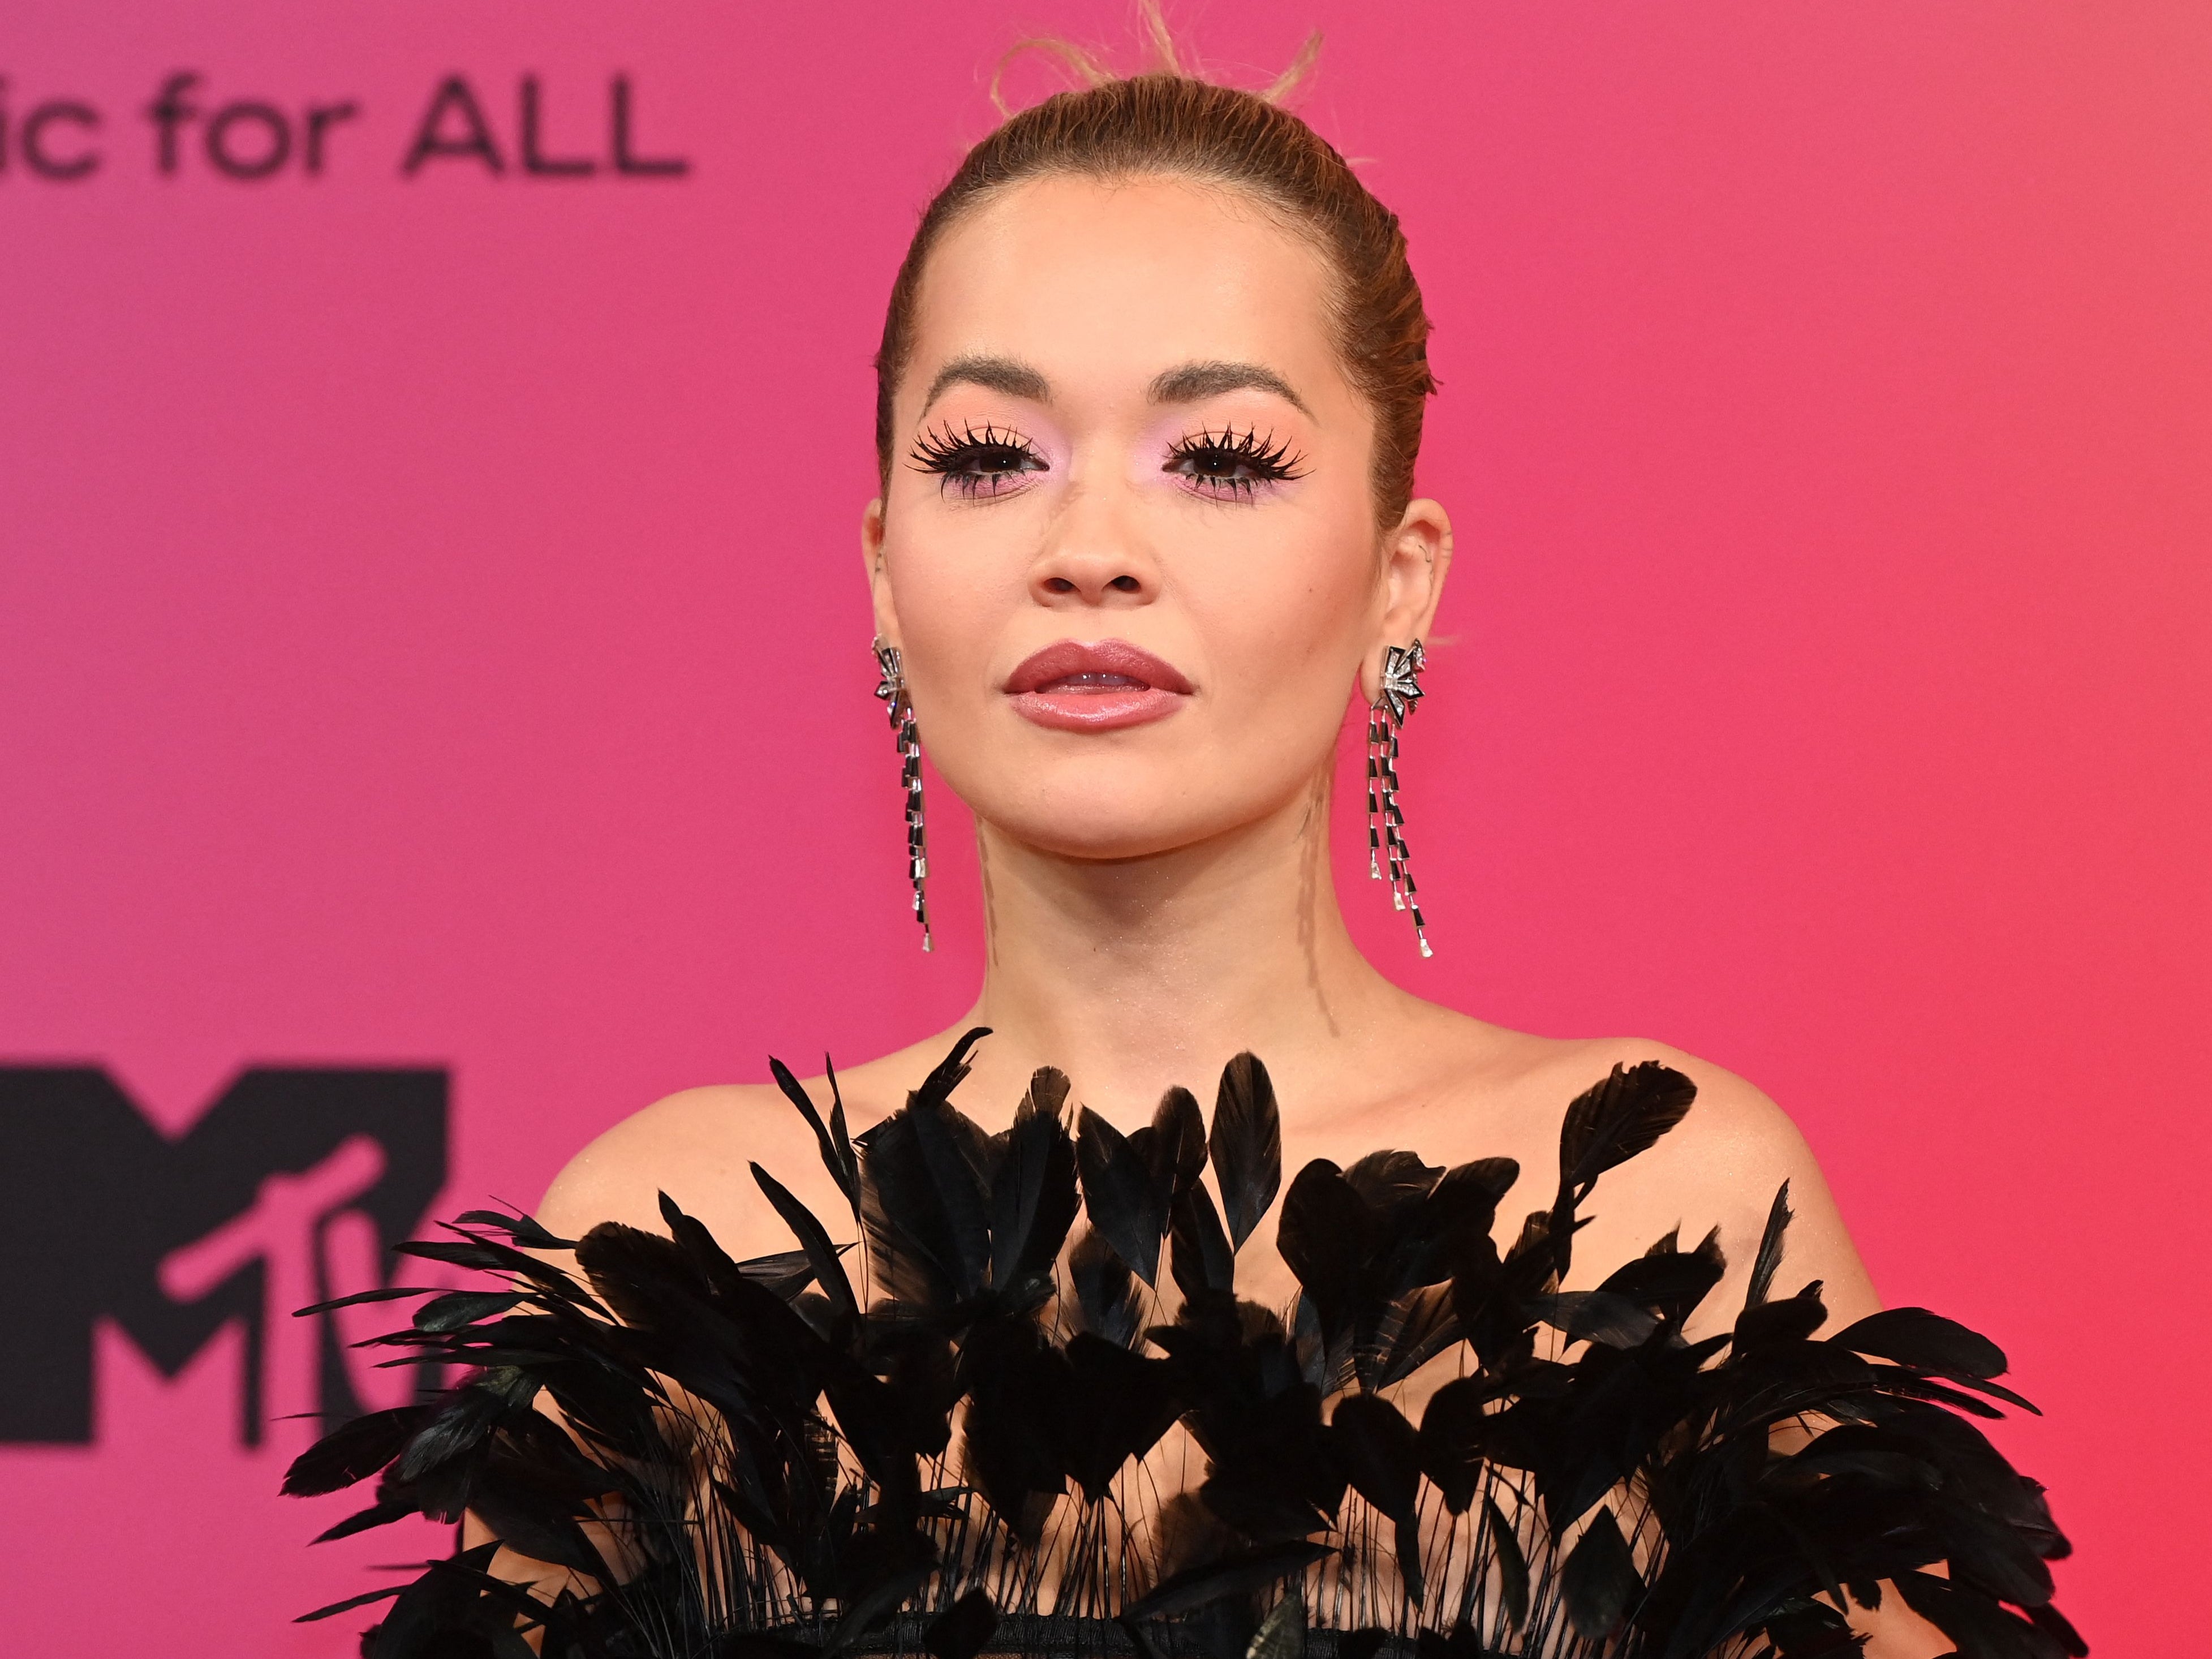 Rita Ora has signed a new deal with BMG